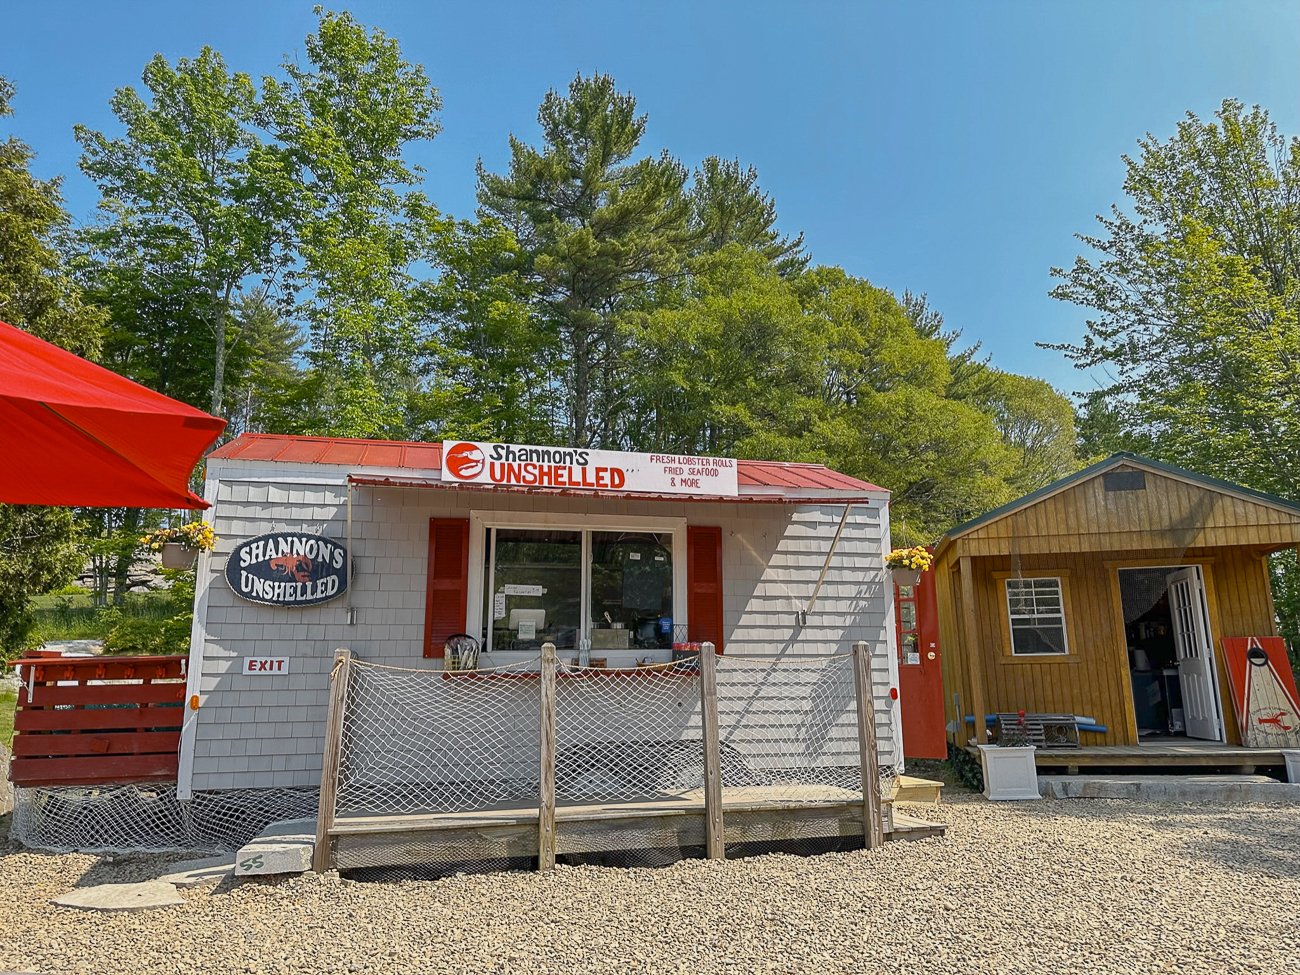 Shannon's Unshelled in Boothbay Harbor, a small white seafood shack with a red roof